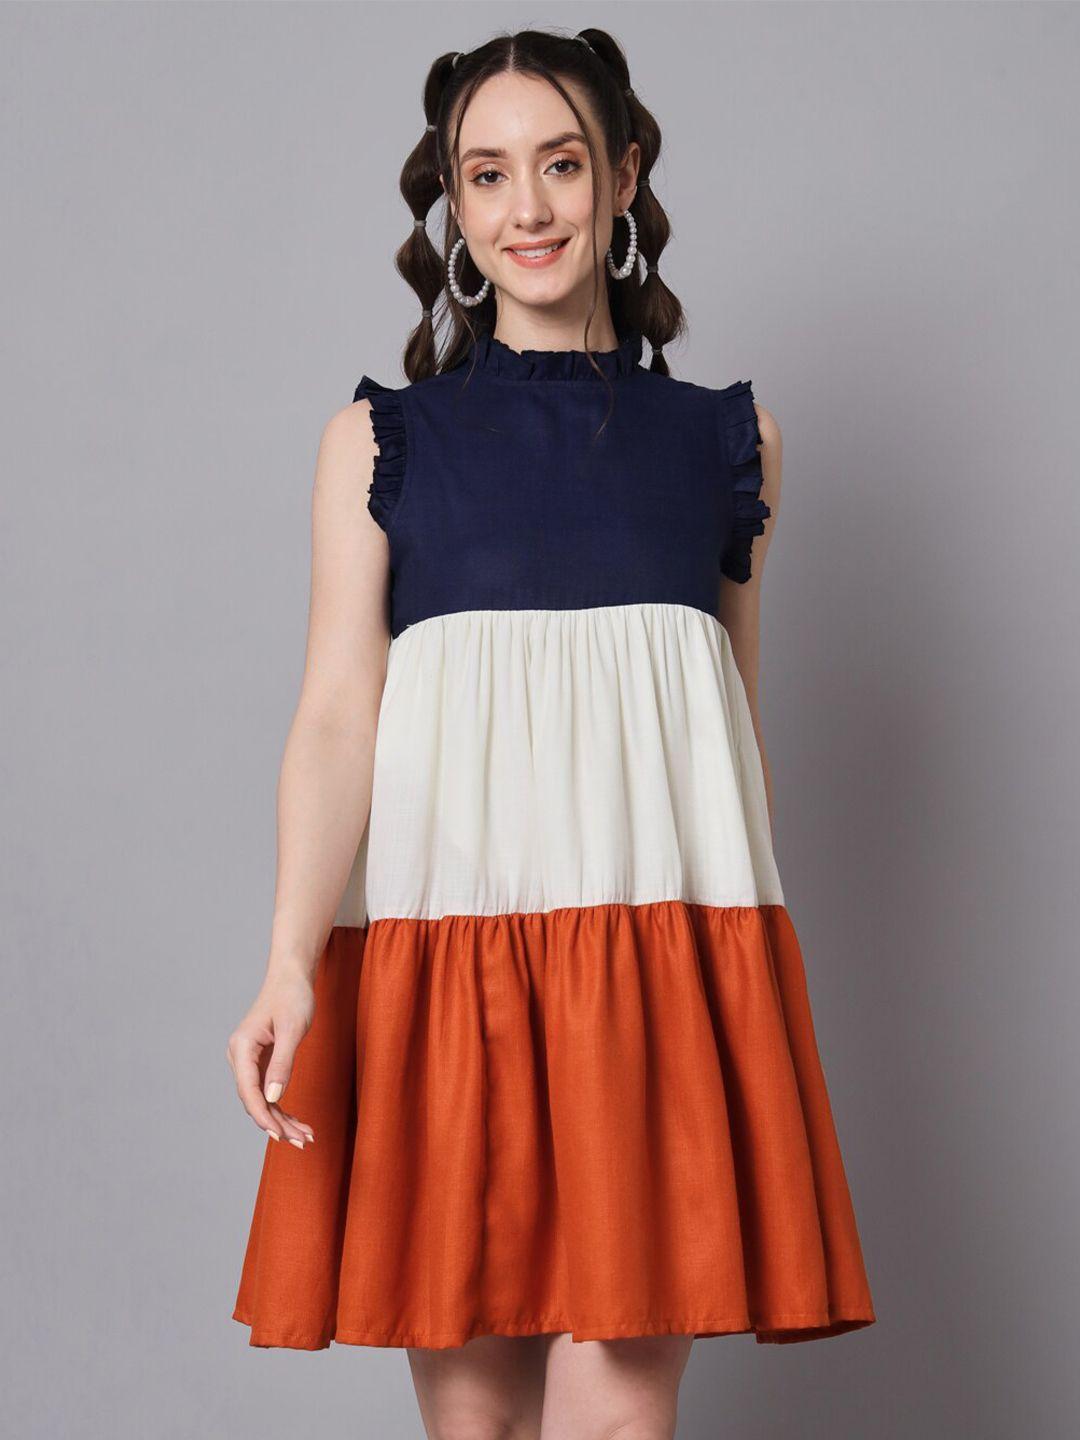 the dry state colourblocked empire dress